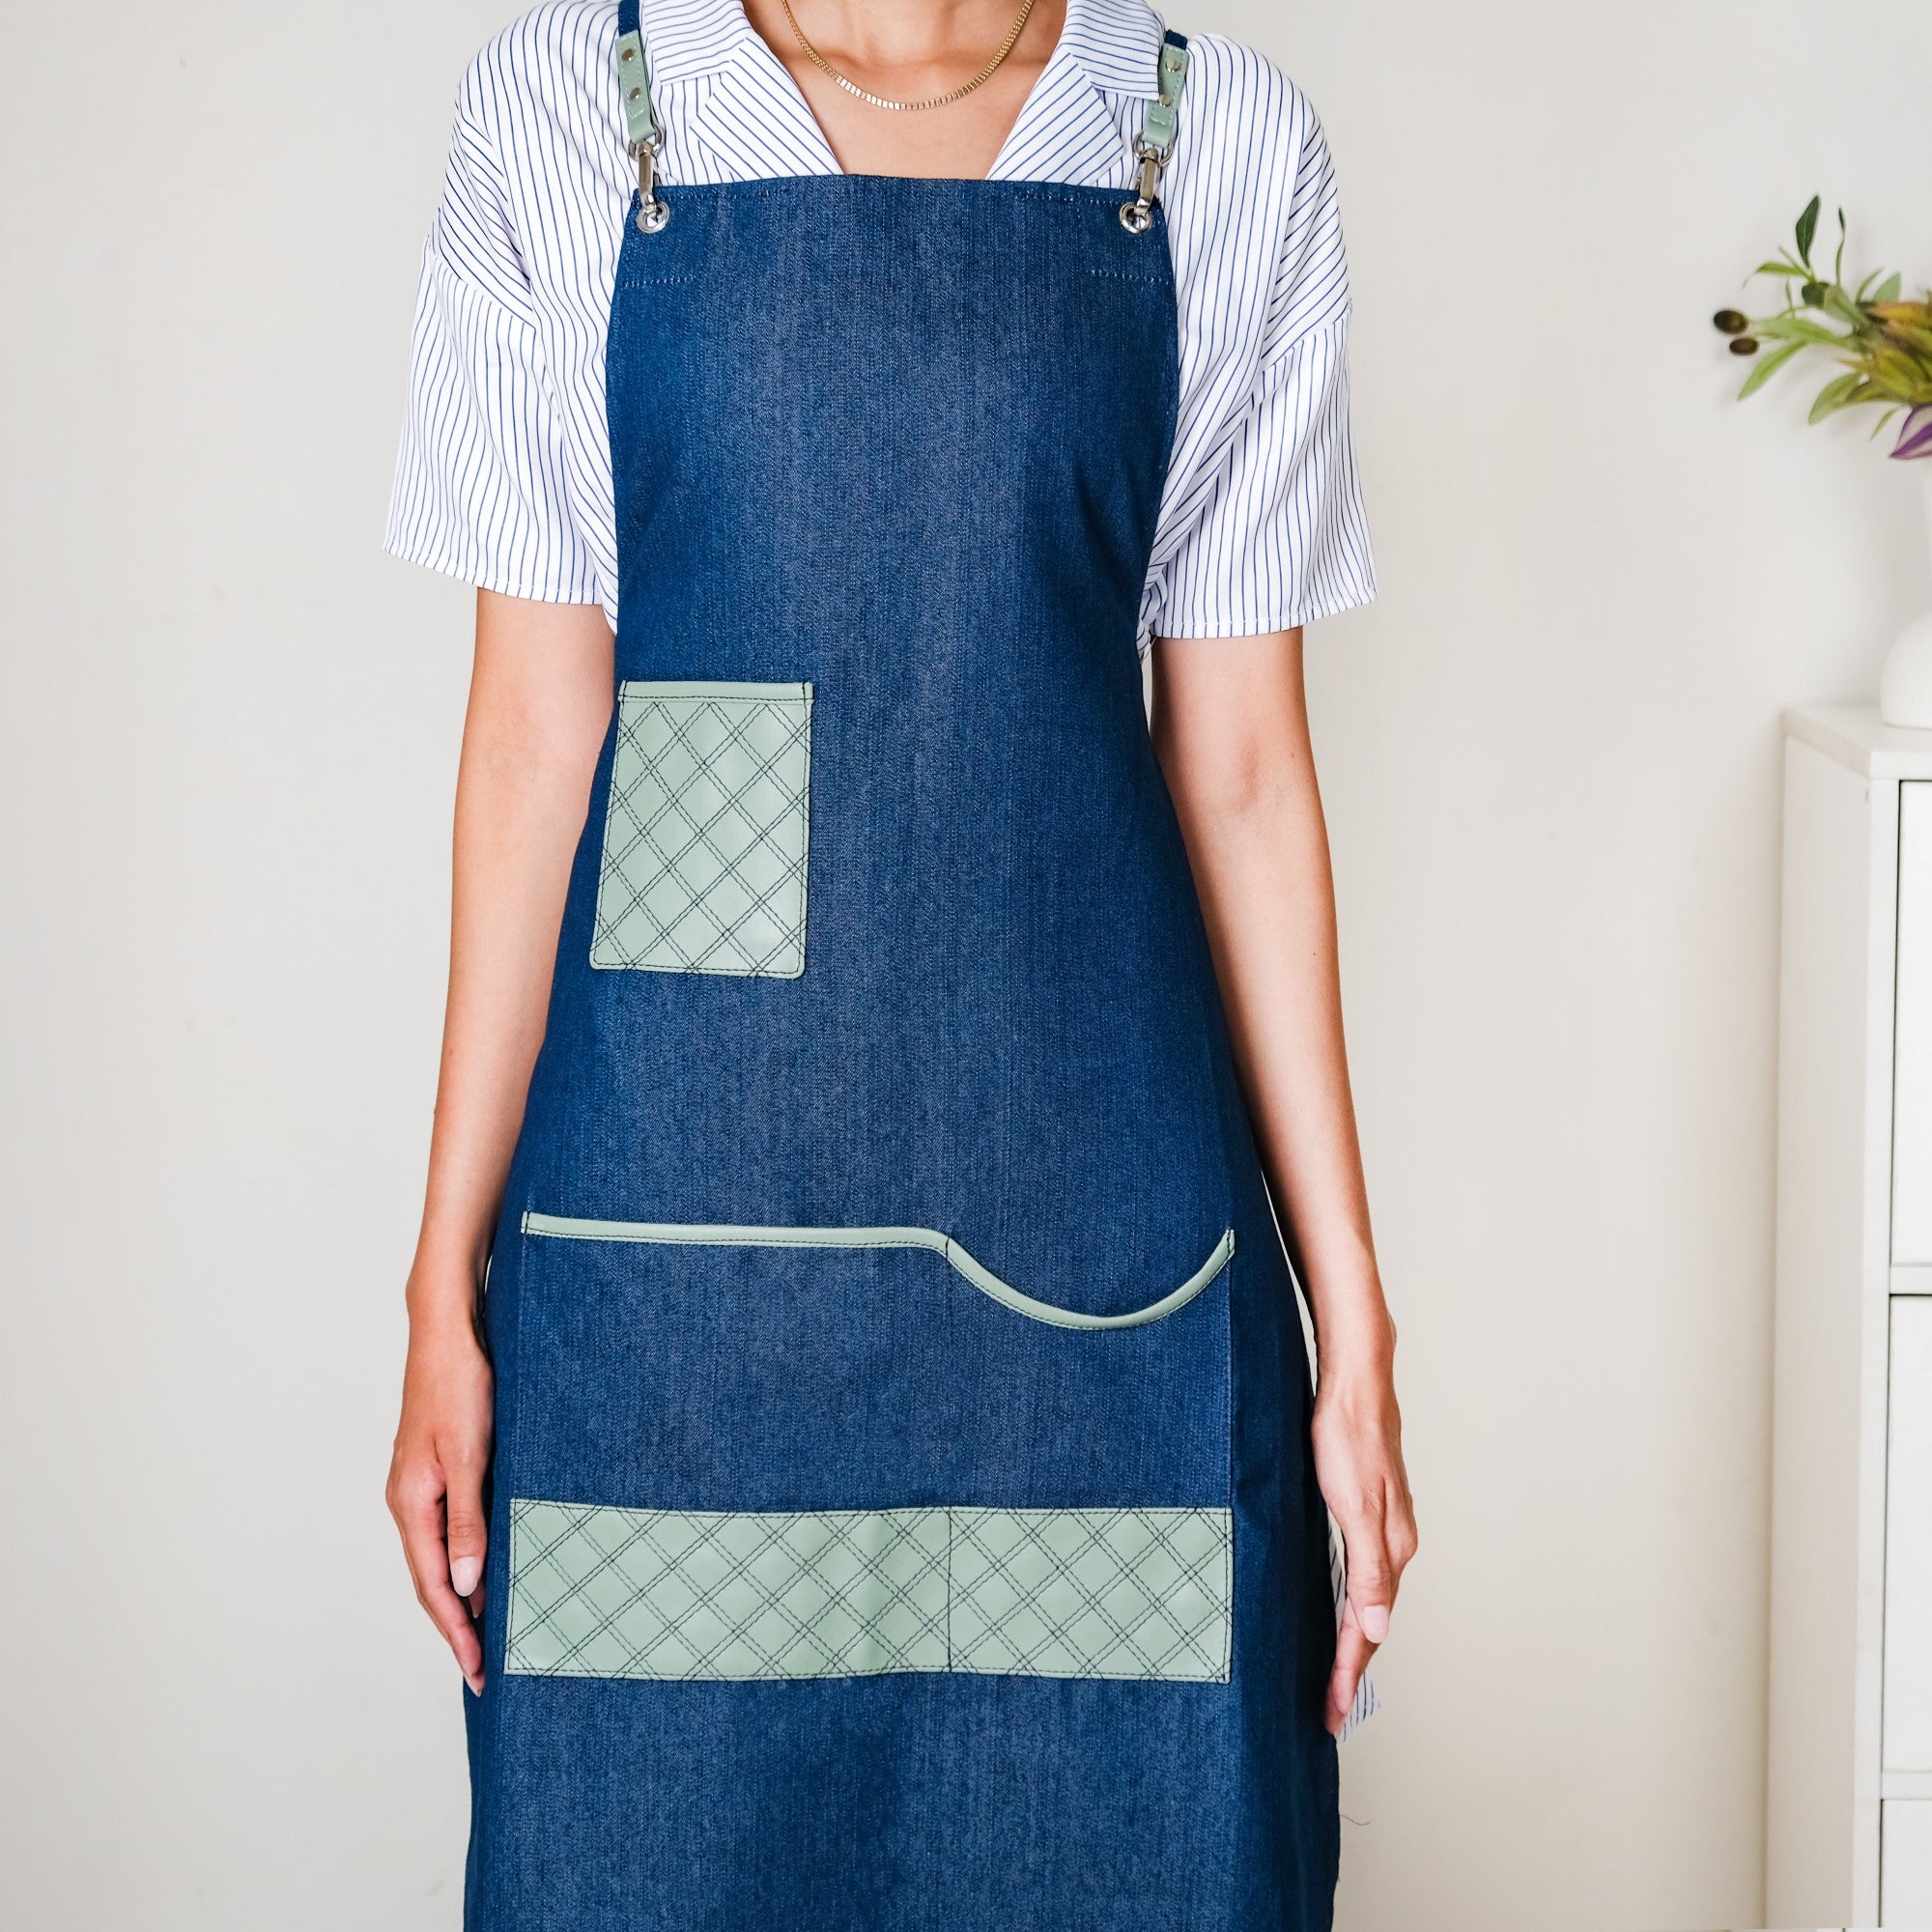 Custom Apron with Leather Straps and Pocket | olpr. USA